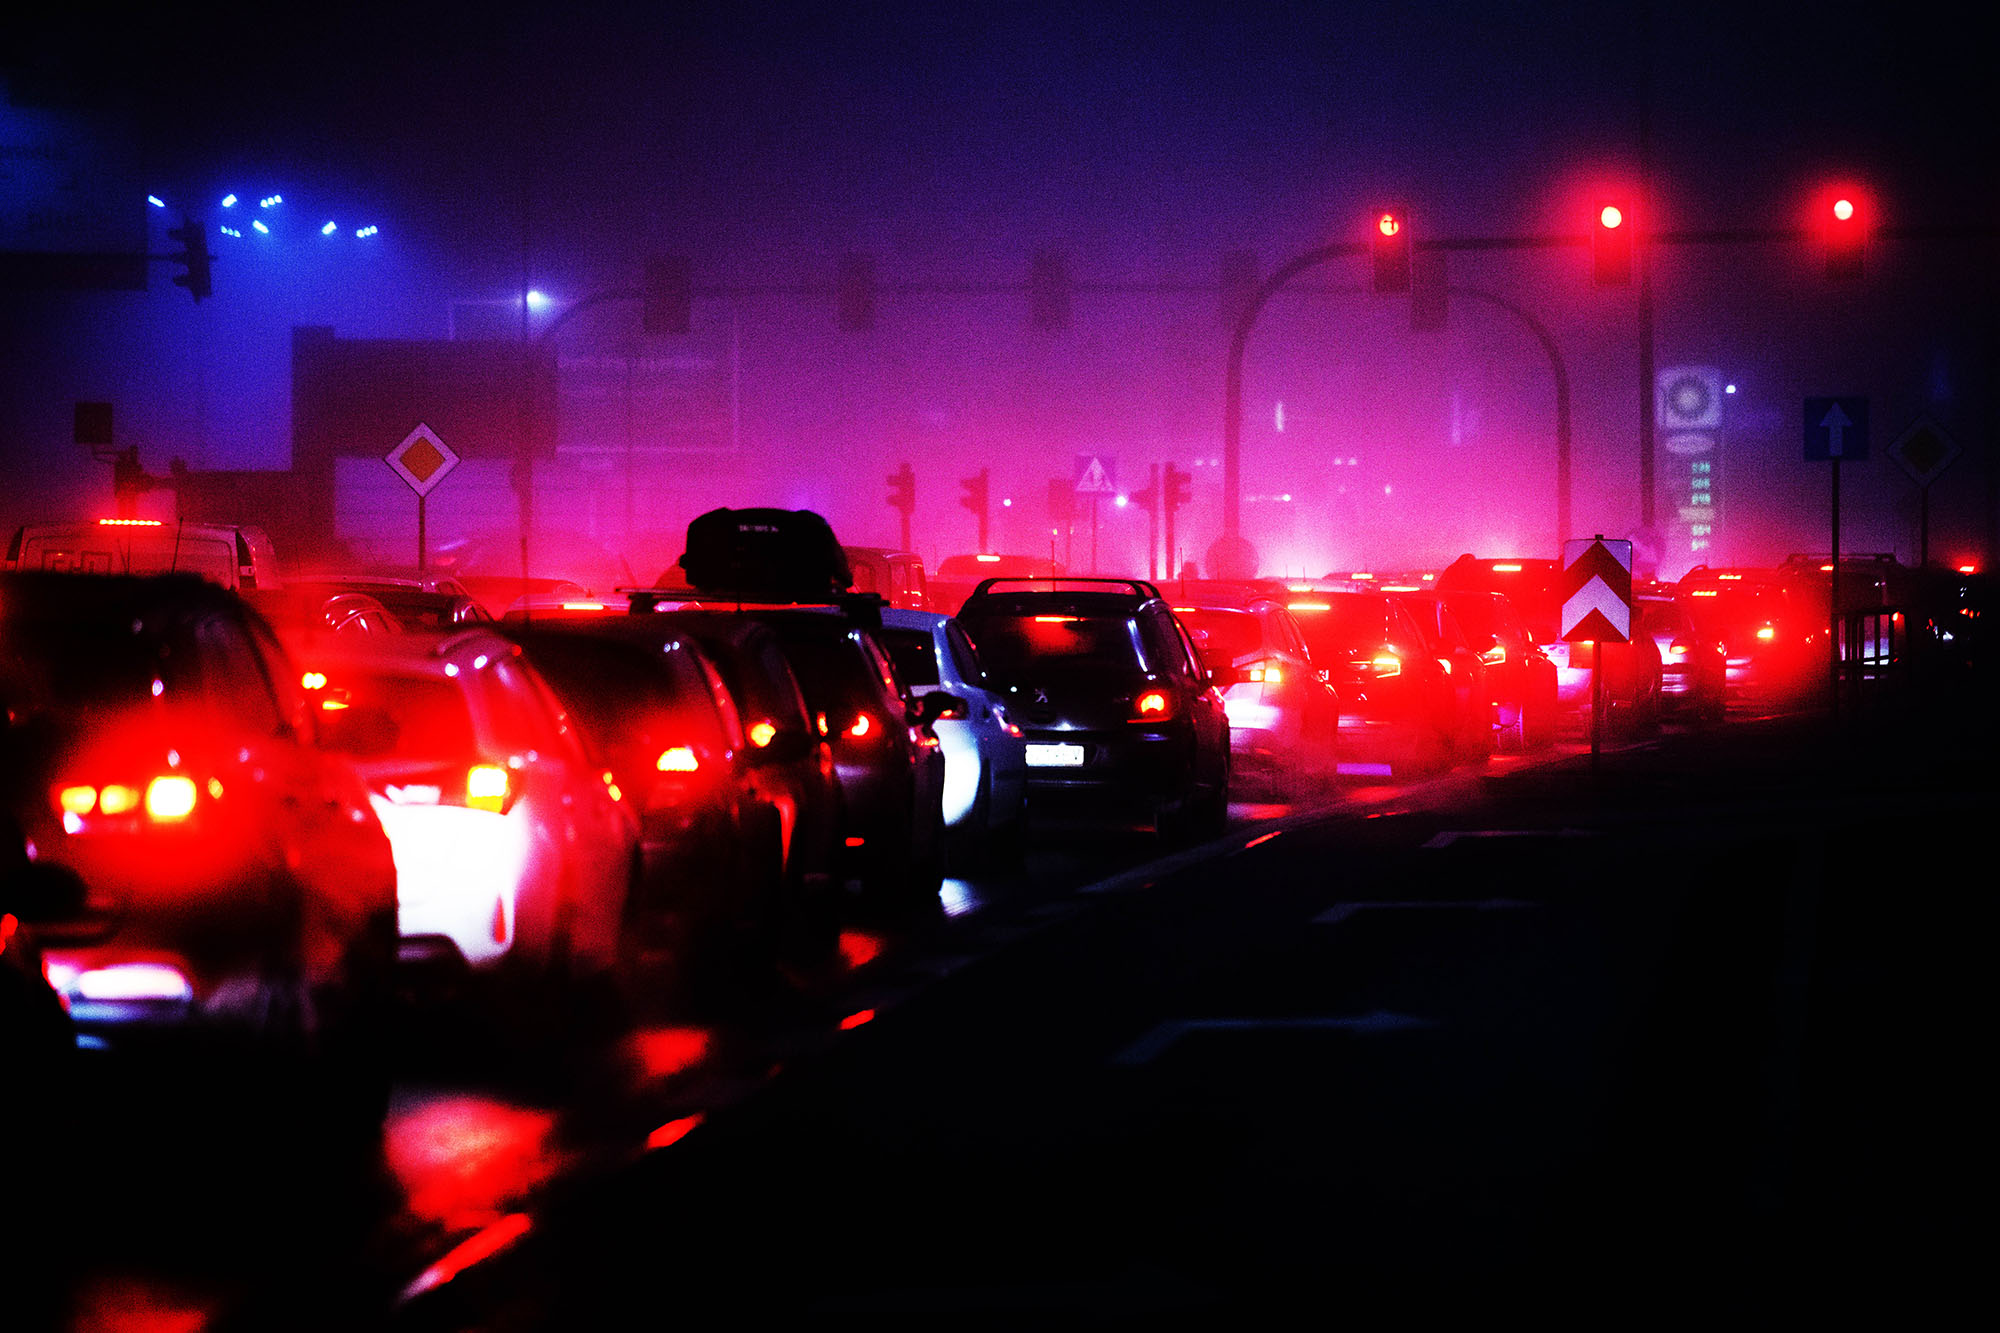 Traffic jam at night with bright red lights